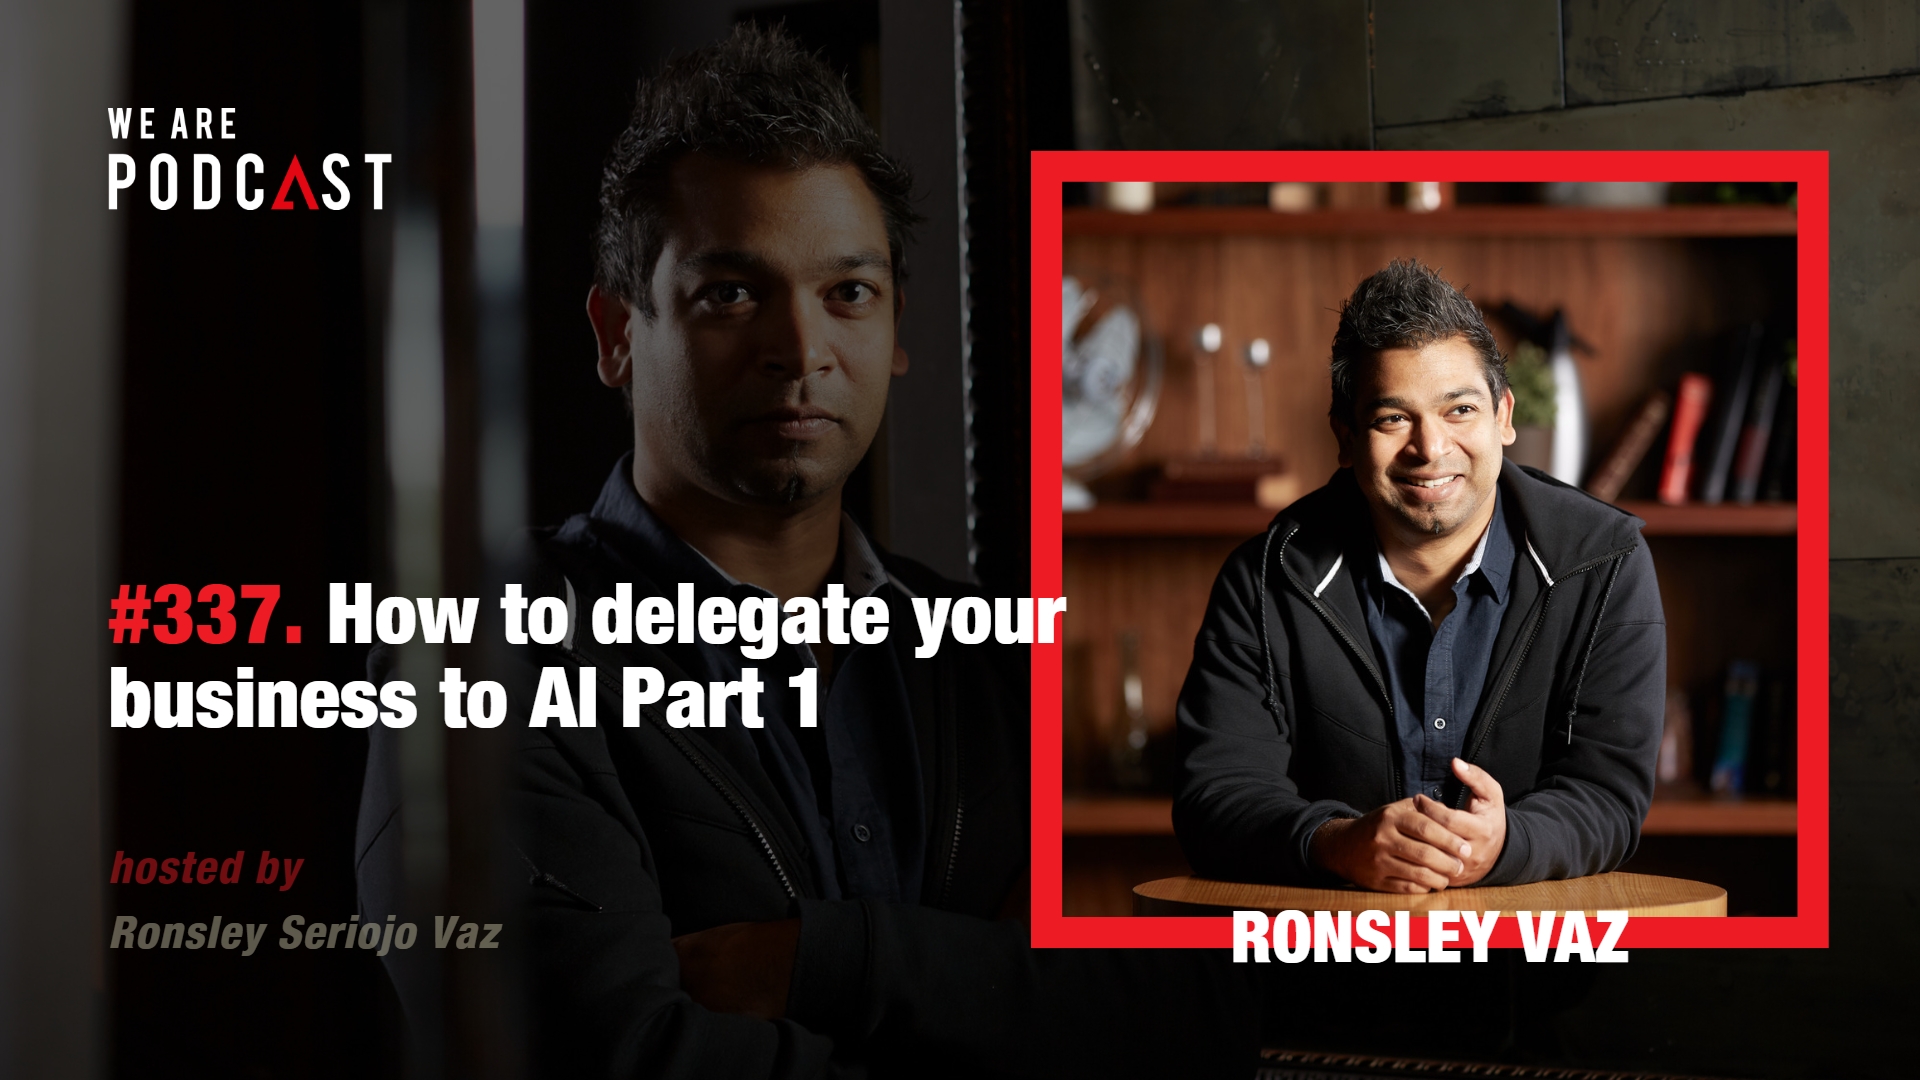 Featured image for “337. How to delegate your business to AI part 1”